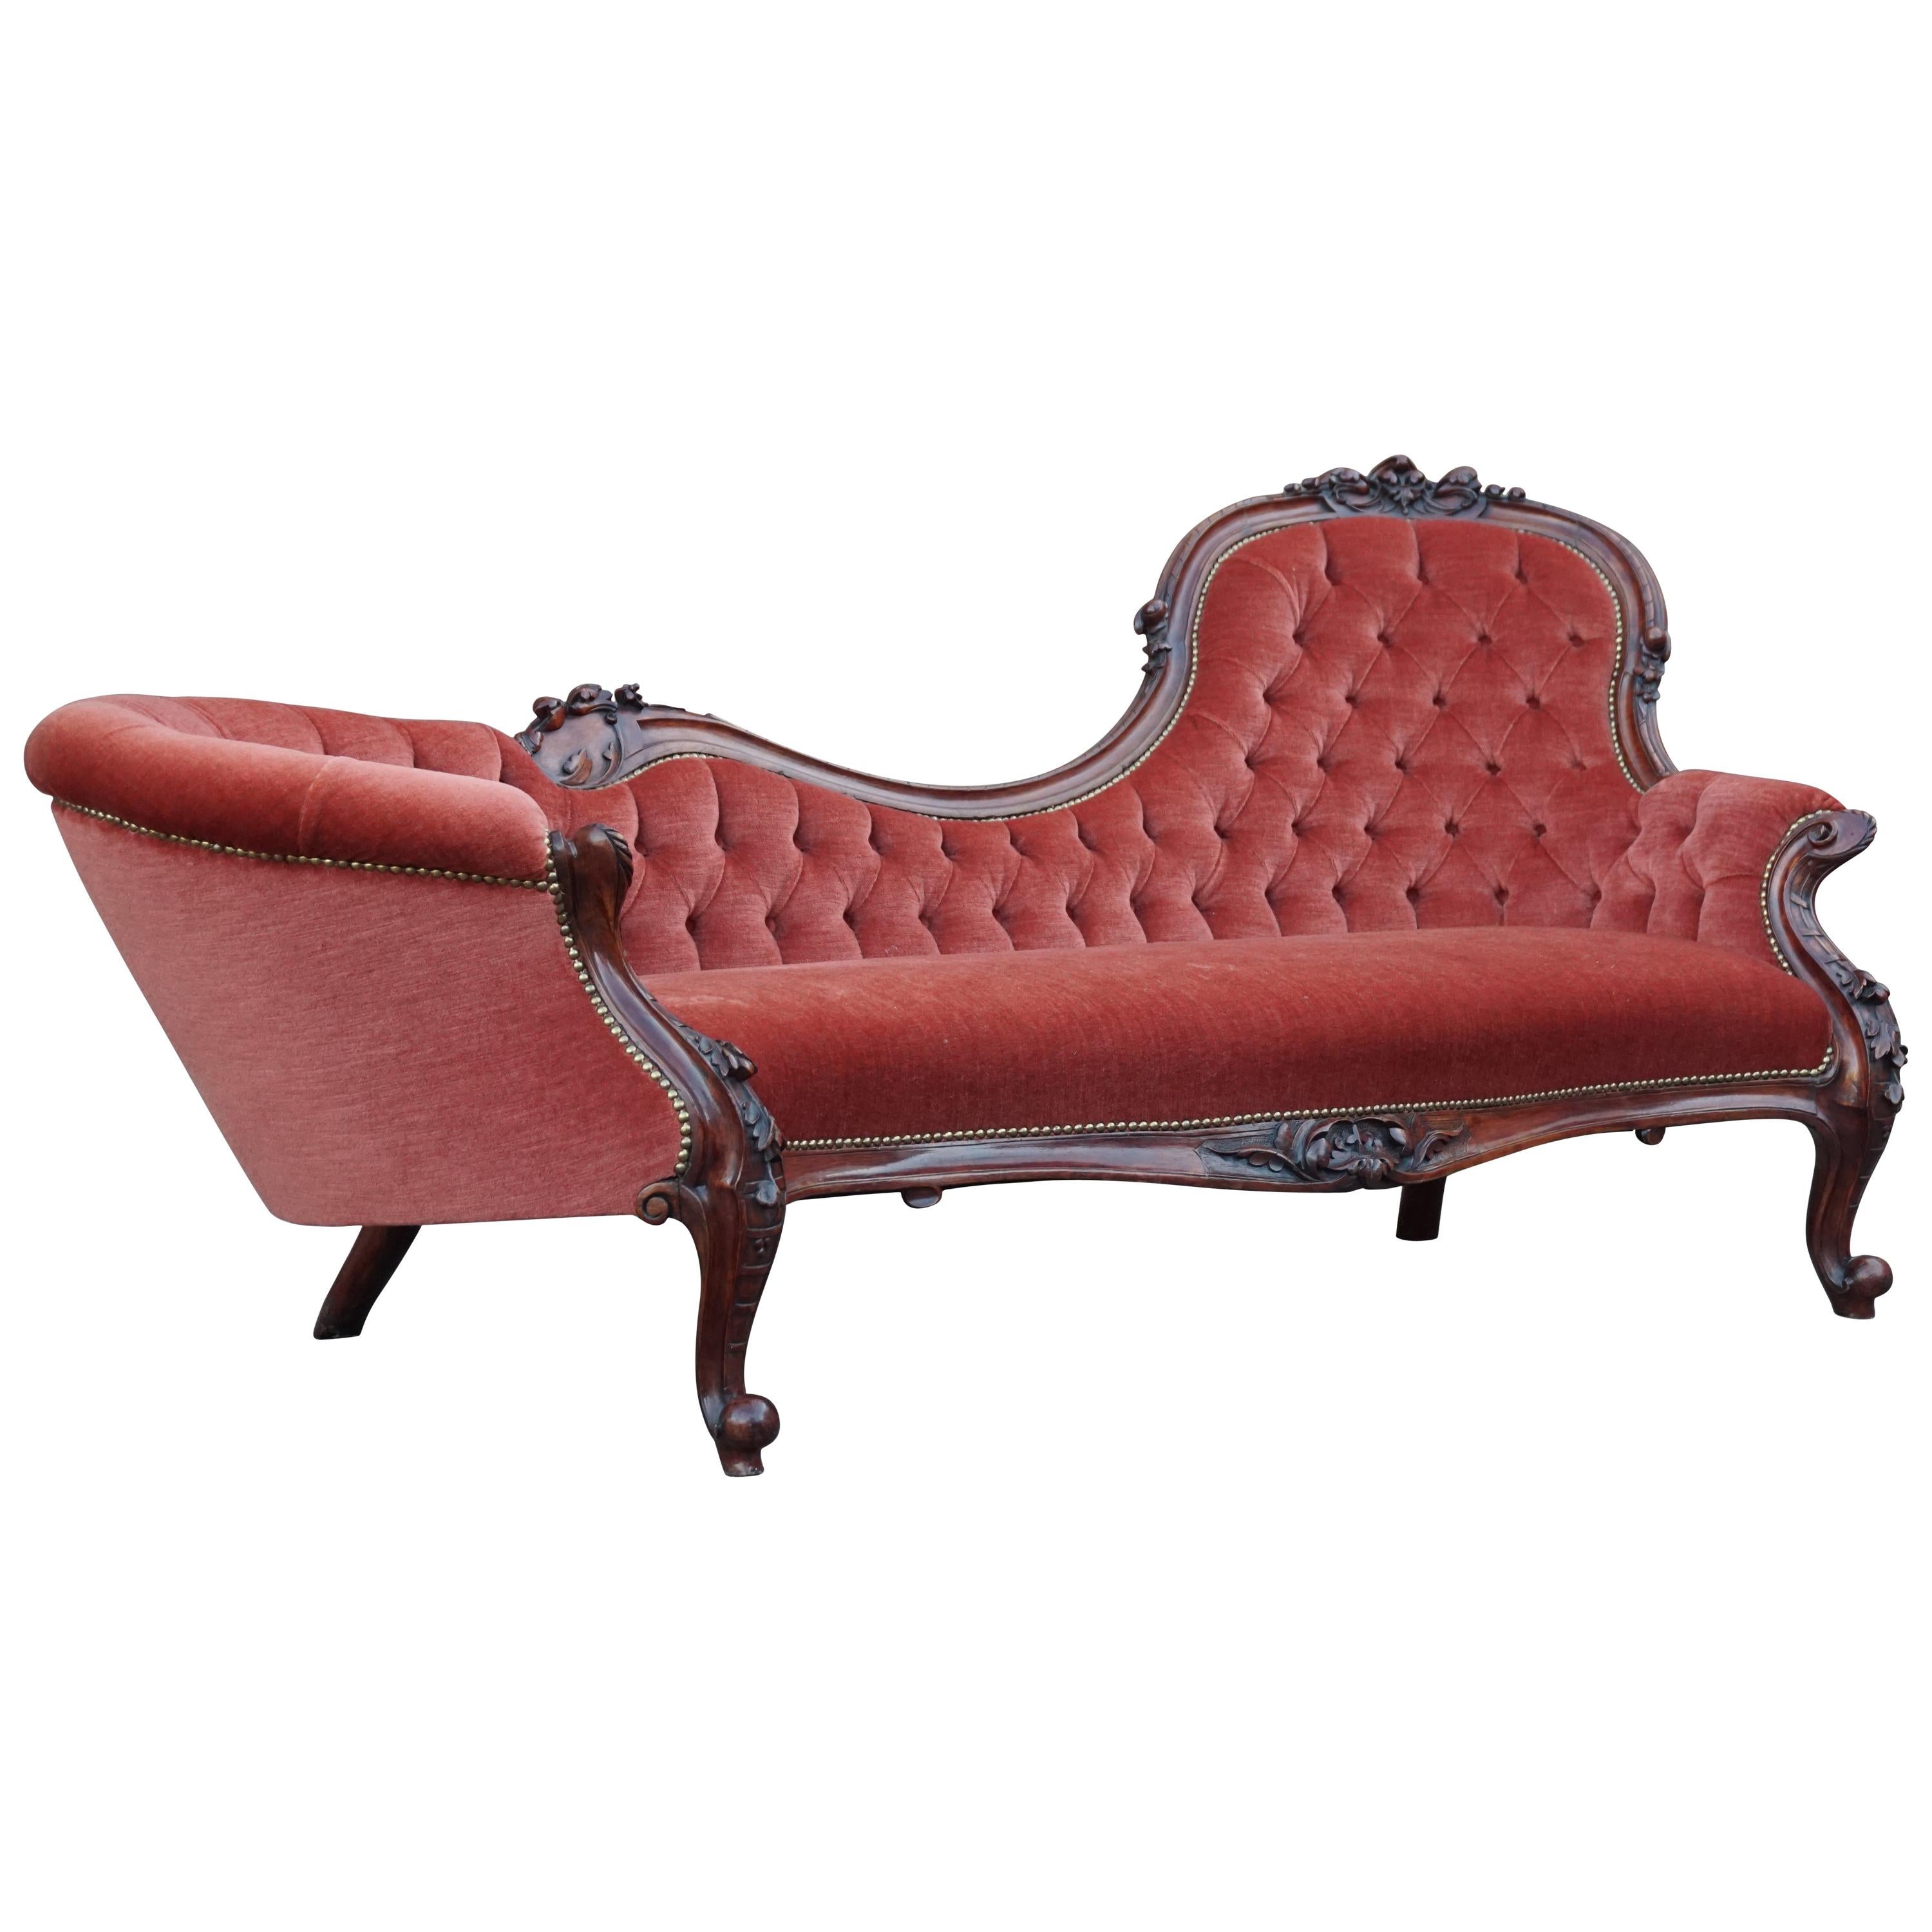 Stunning Design and Excellent Condition Antique Chaise Longue / Relaxing Chair